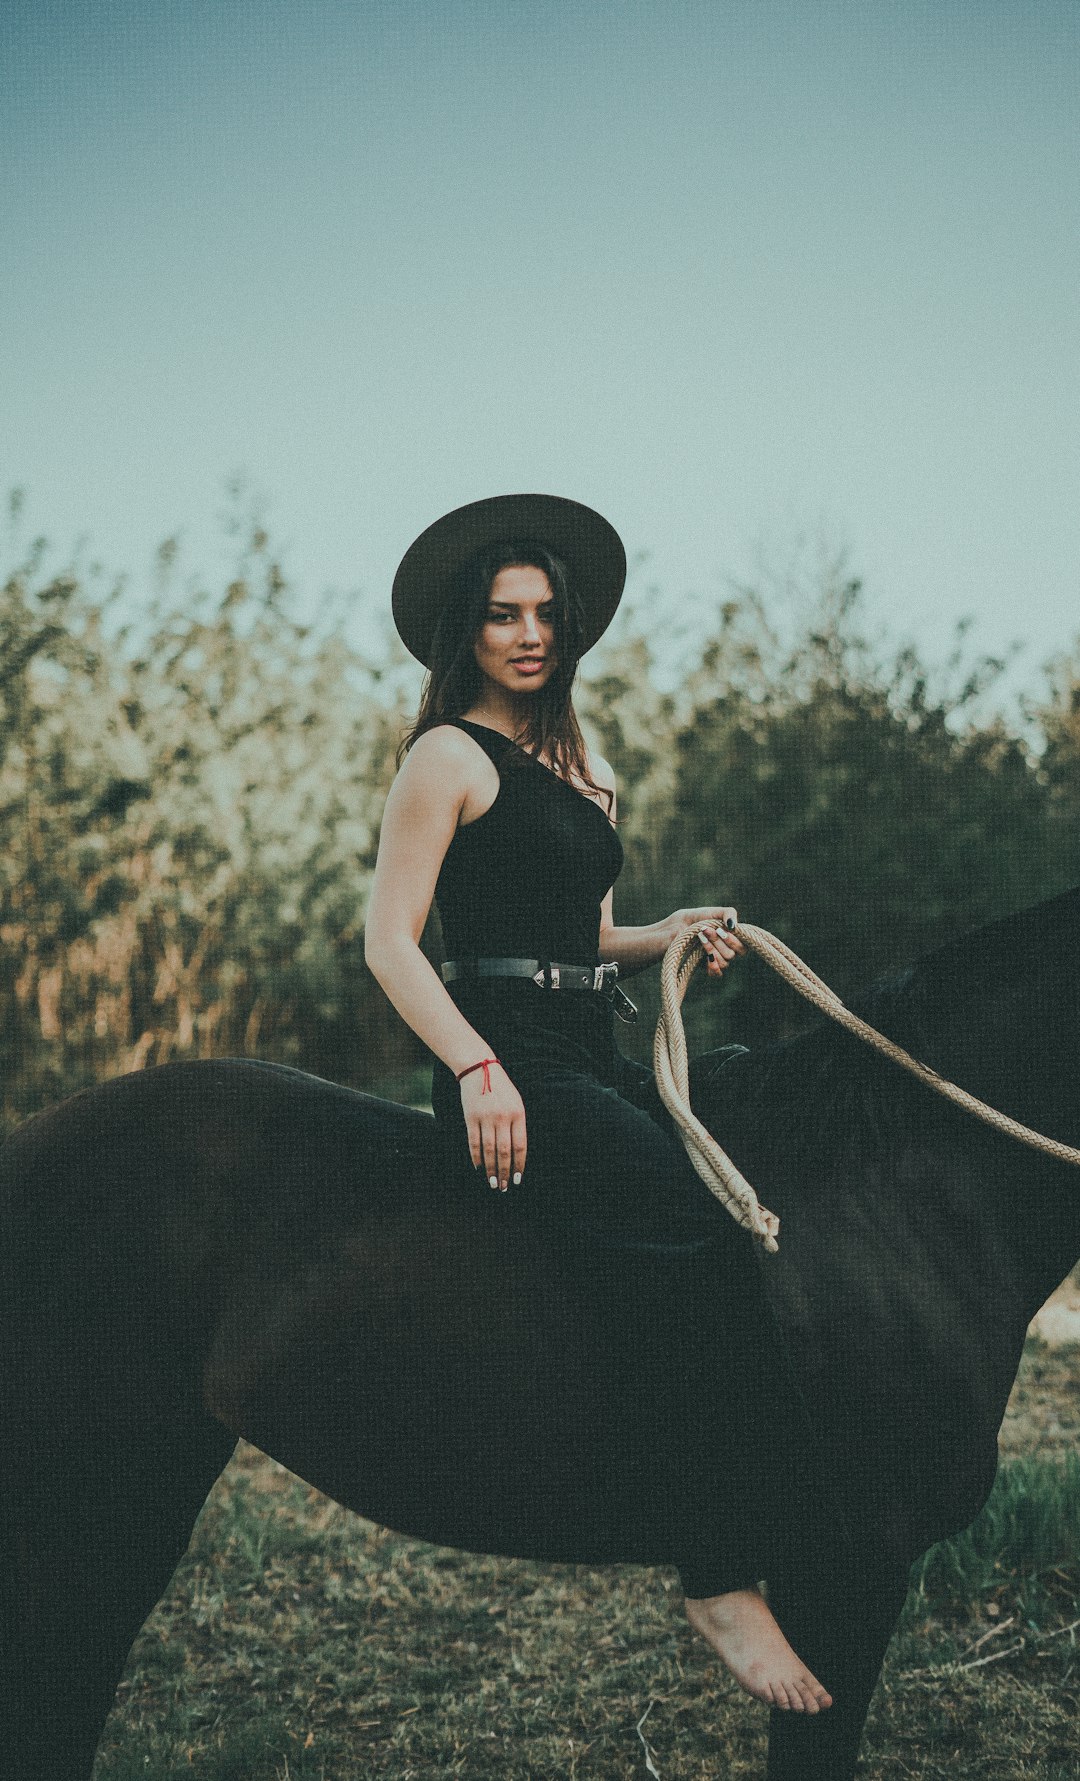 woman in black tank top and black hat riding on black horse during daytime